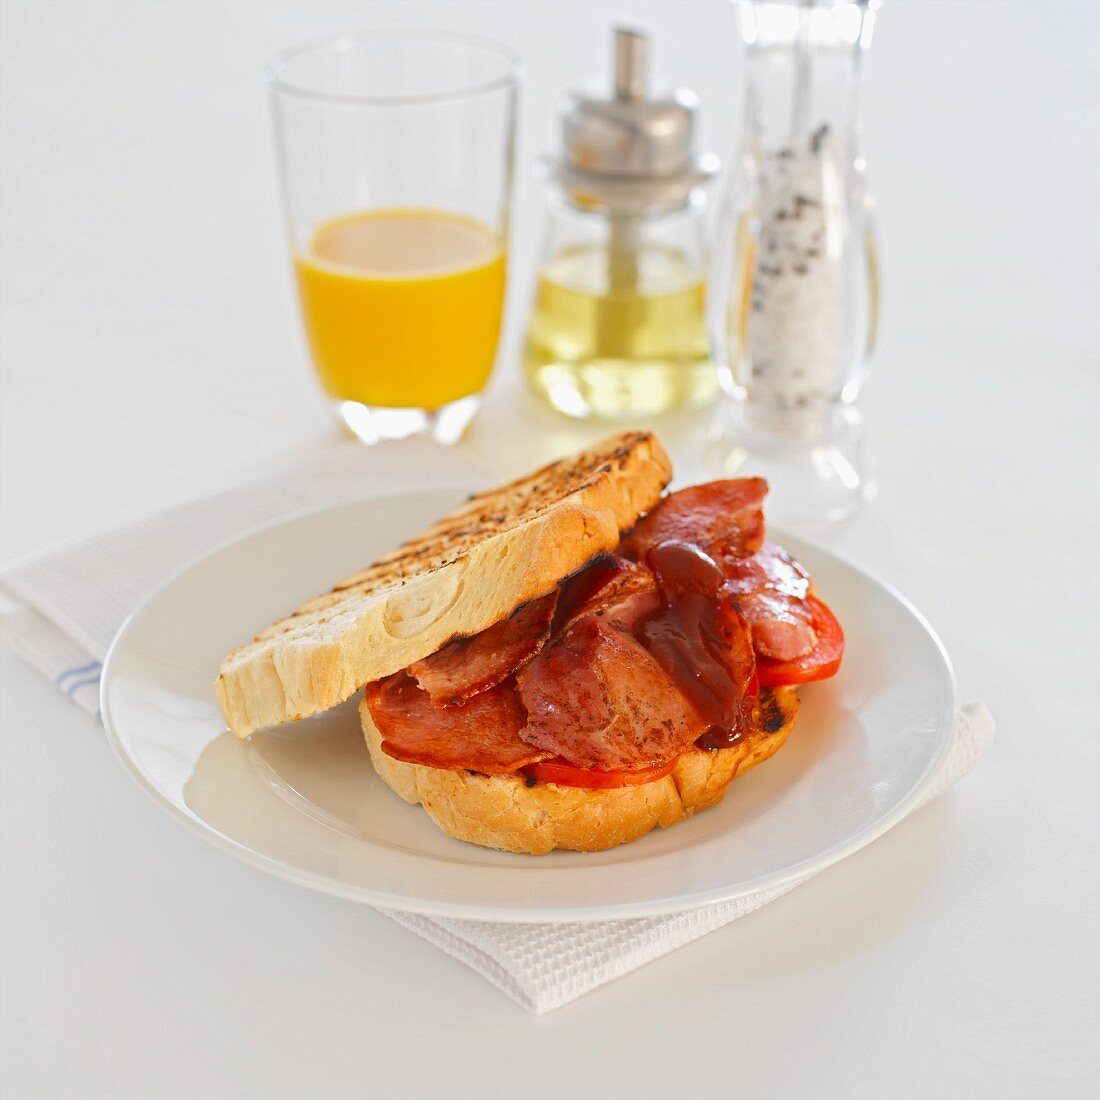 Toasted sandwich with bacon and tomatoes